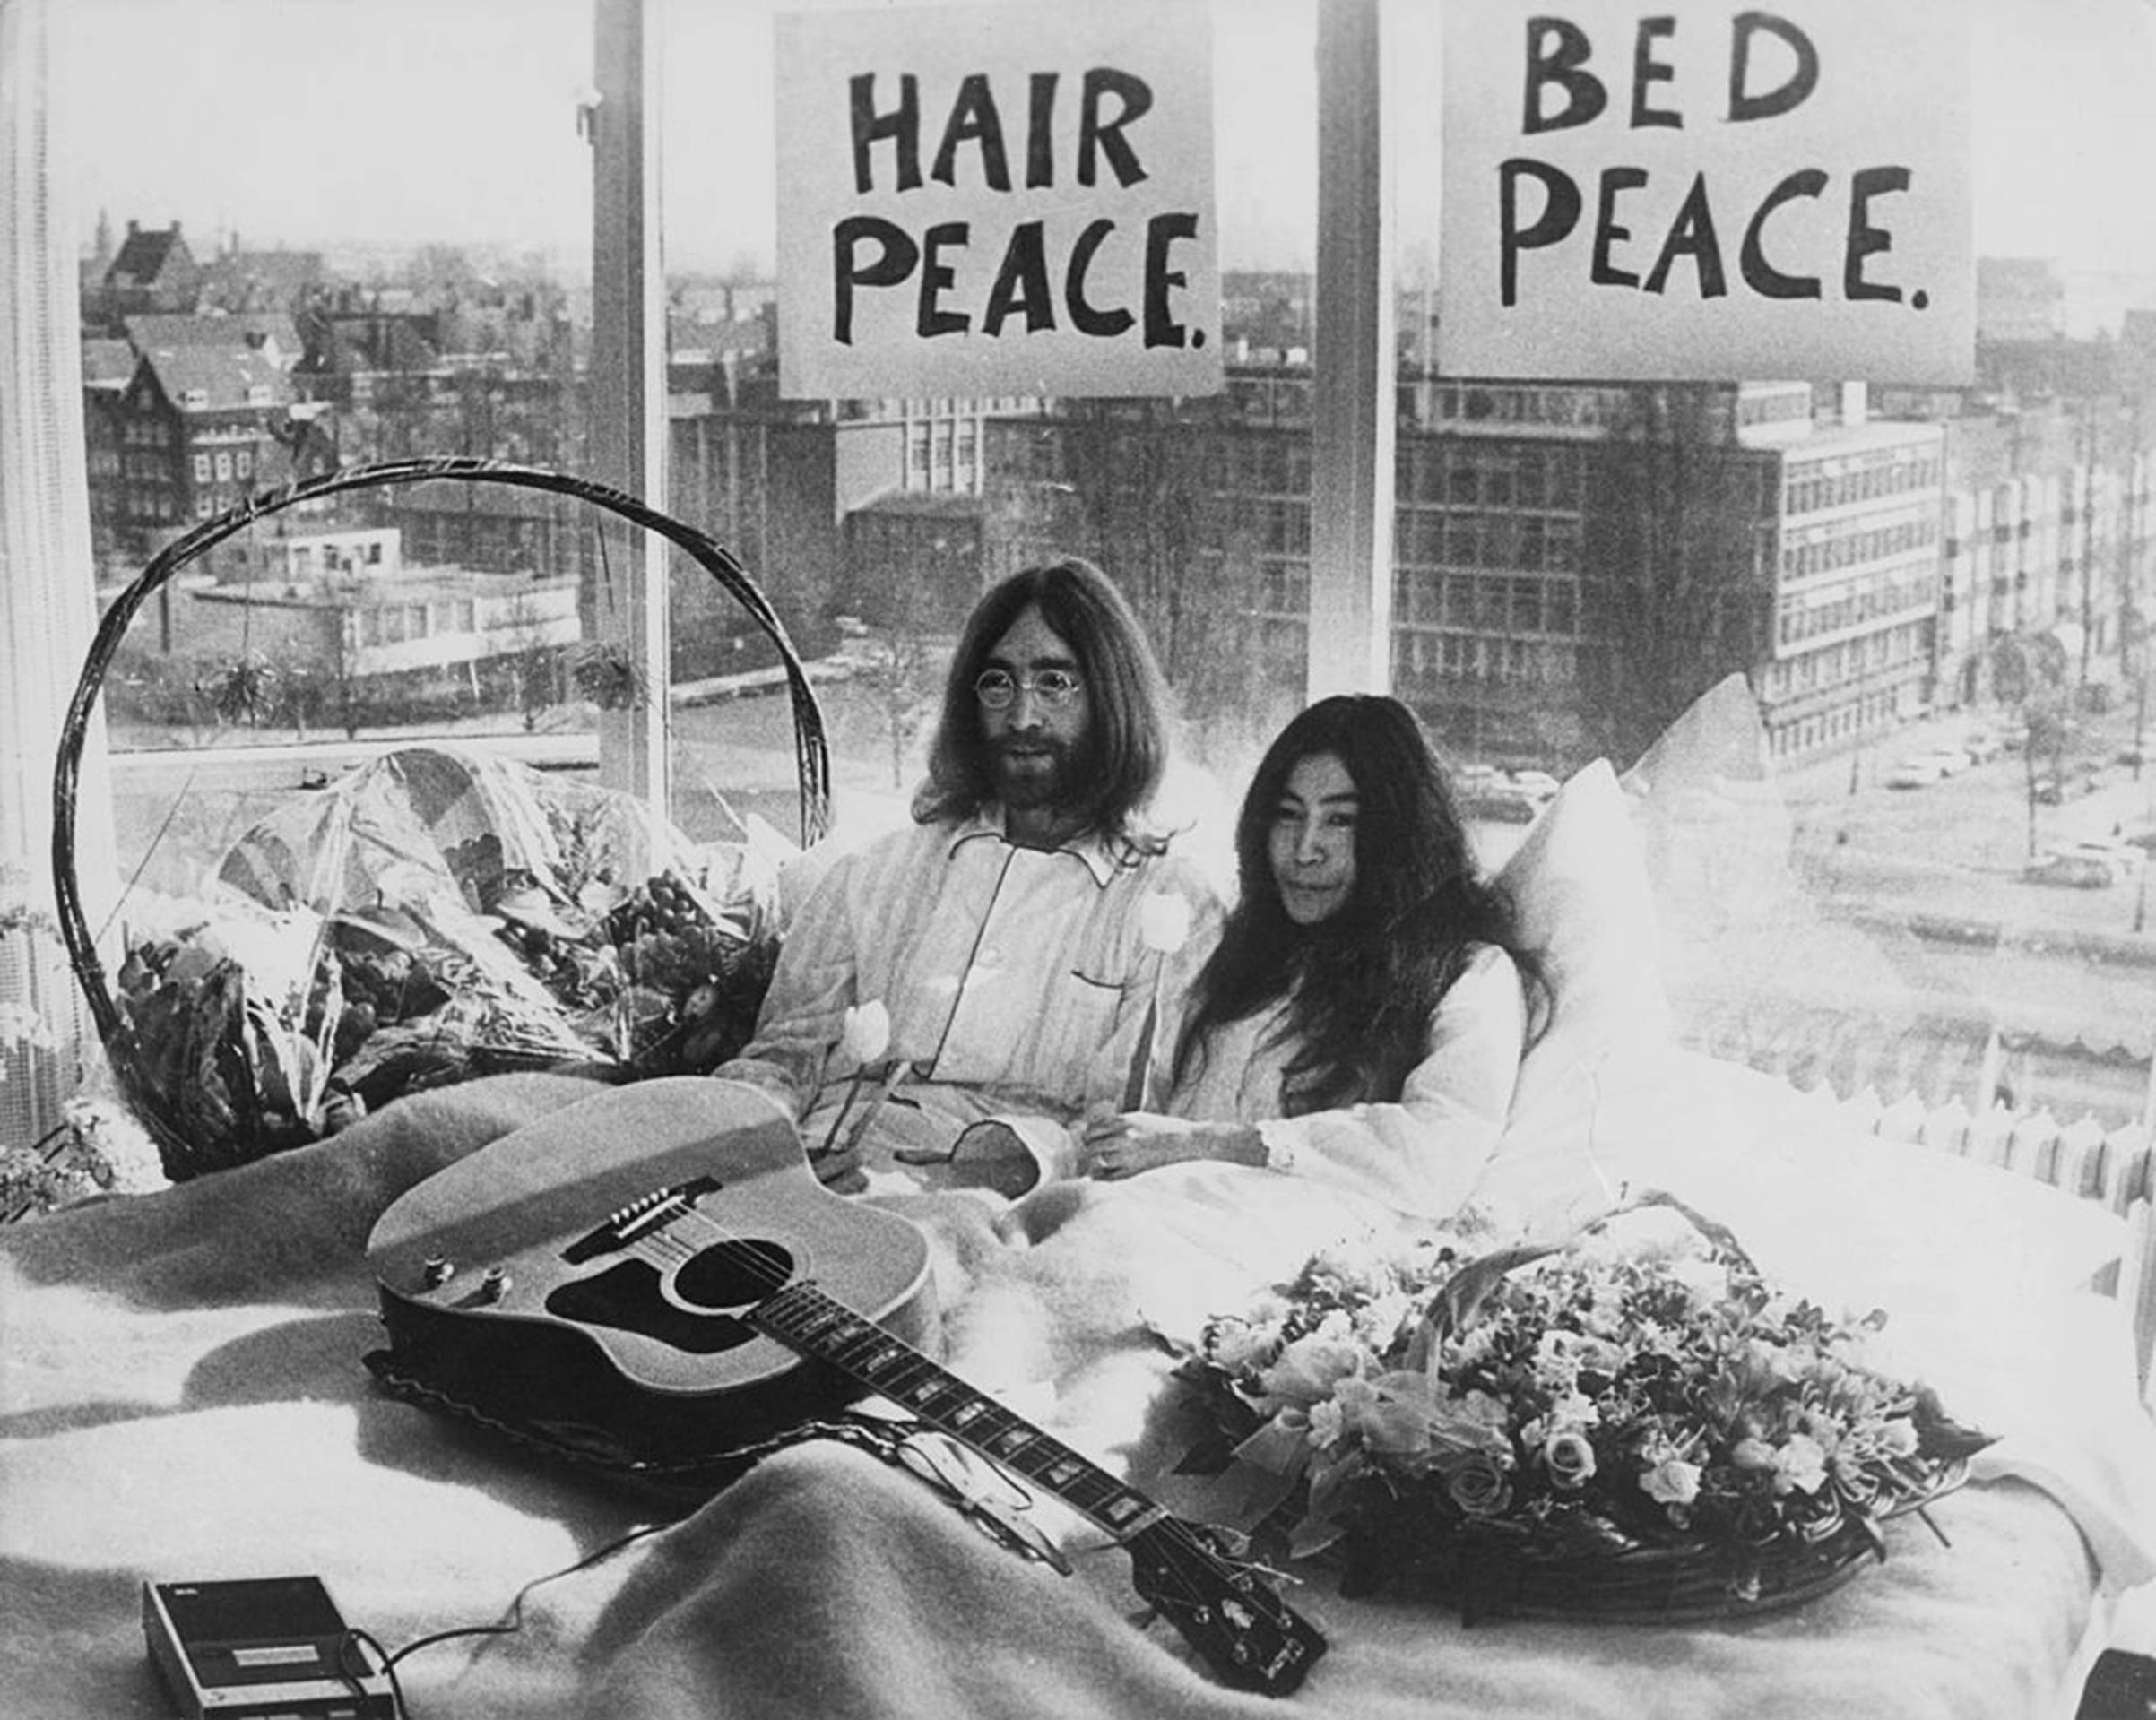 Newly-weds John Lennon of The Beatles and artist Yoko Ono kick-off a bed-in for peace on Mar. 25, 1969, in their suite at the Hilton Amsterdam in The Netherlands. (Keystone/Hulton Archive—Getty Images)